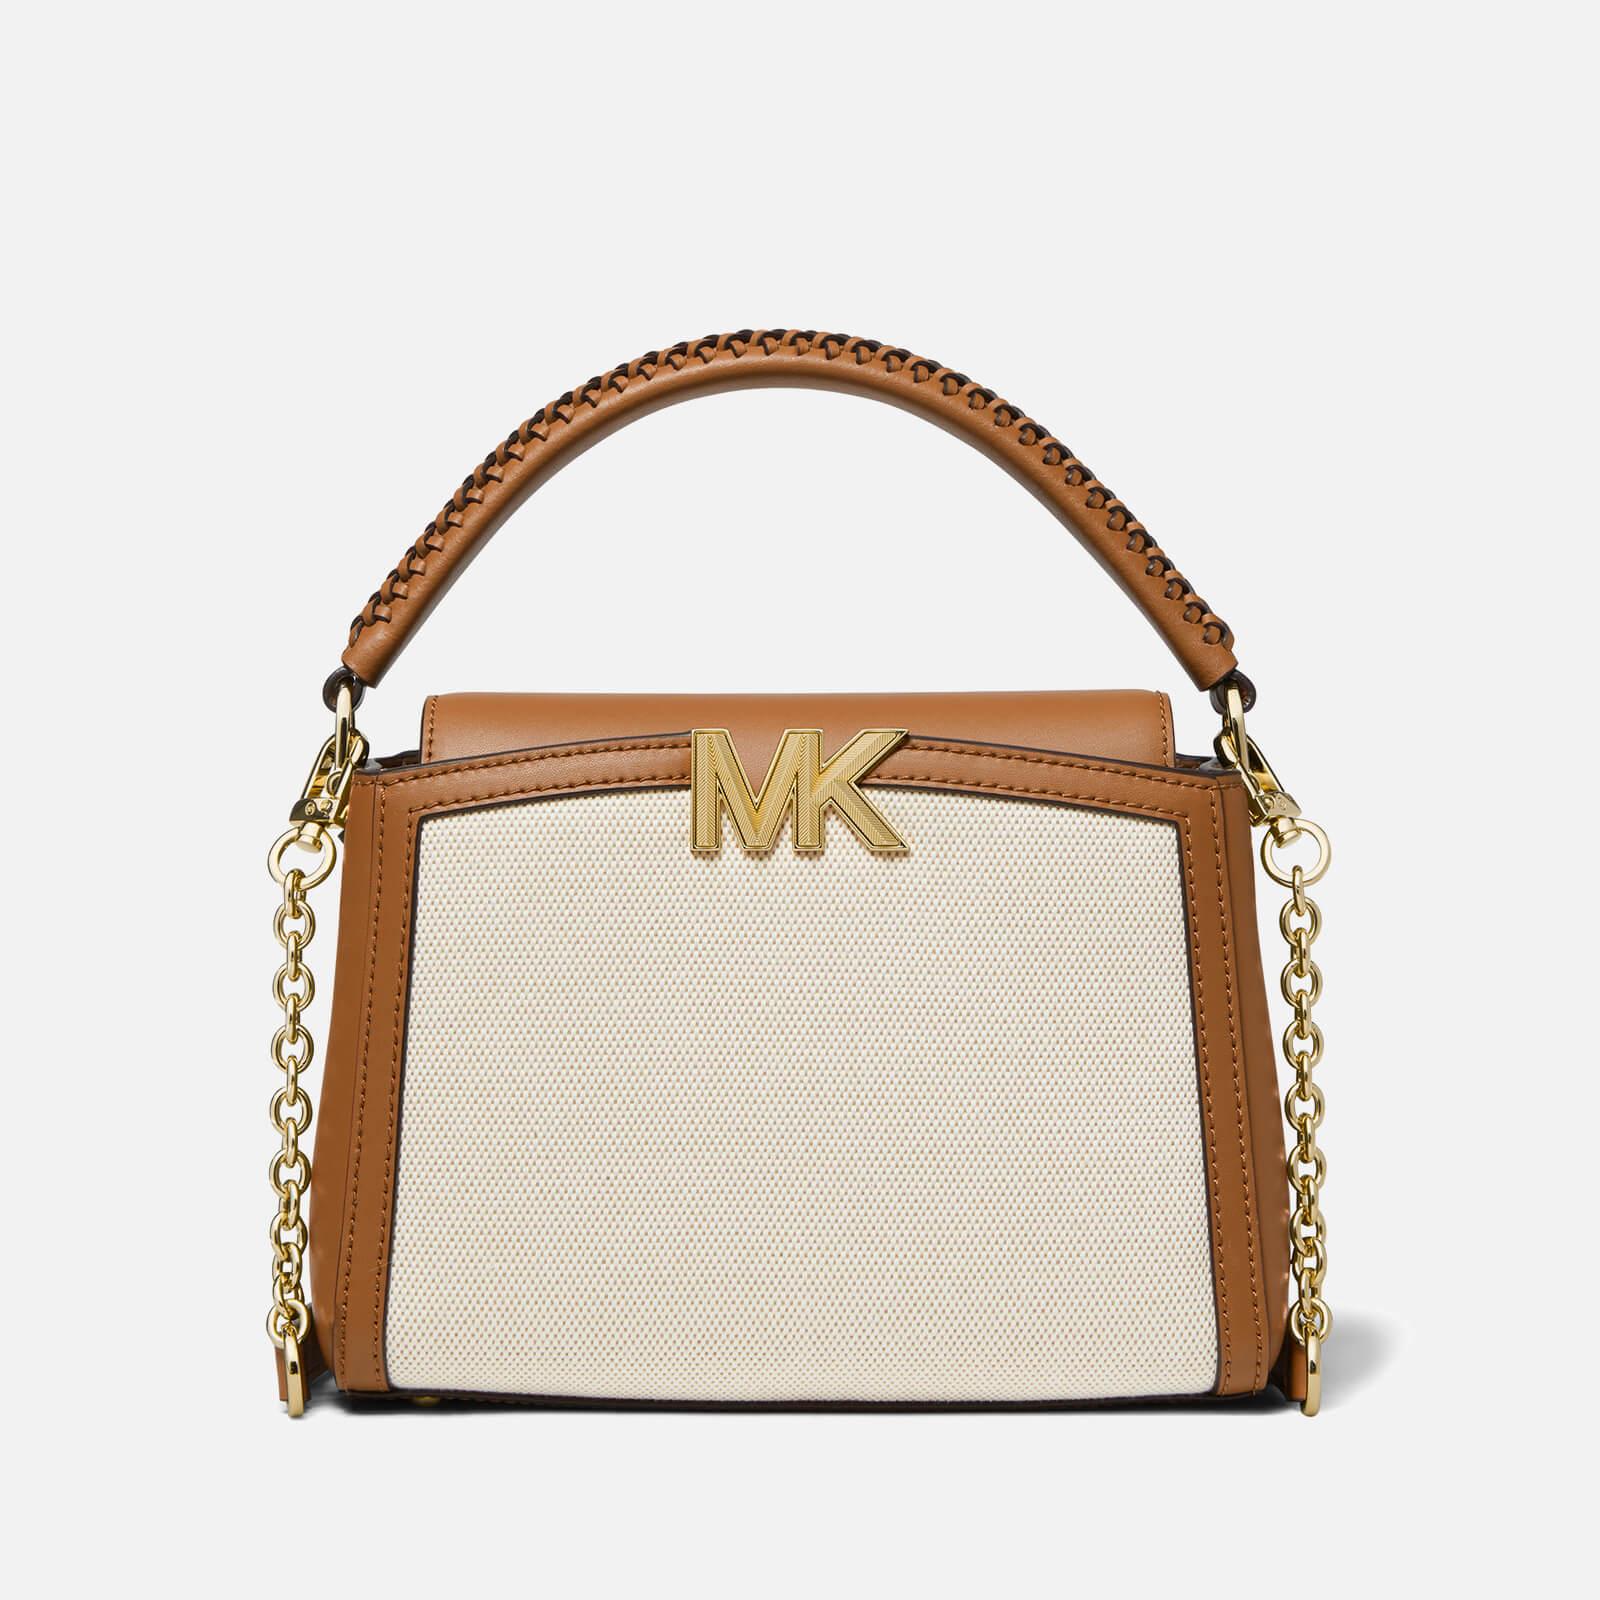 Michael Kors purse: Get up to 60% off the brand's bags and more